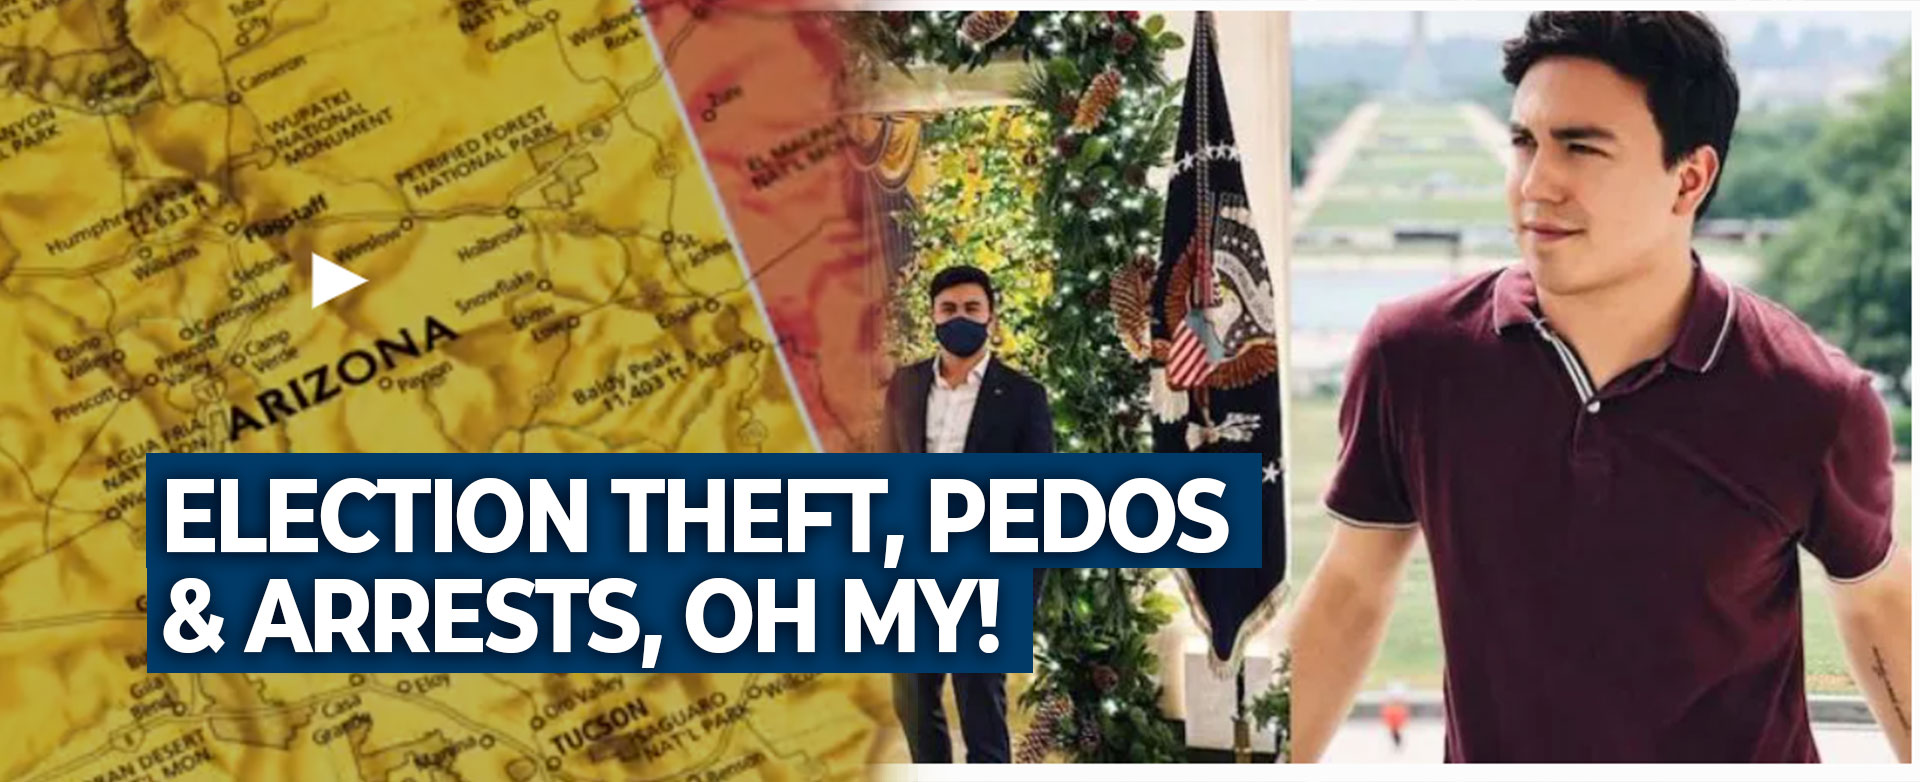 MyPatriotsNetwork-Election Theft, Pedos & Arrests, Oh My! – February 6, 2021 Update